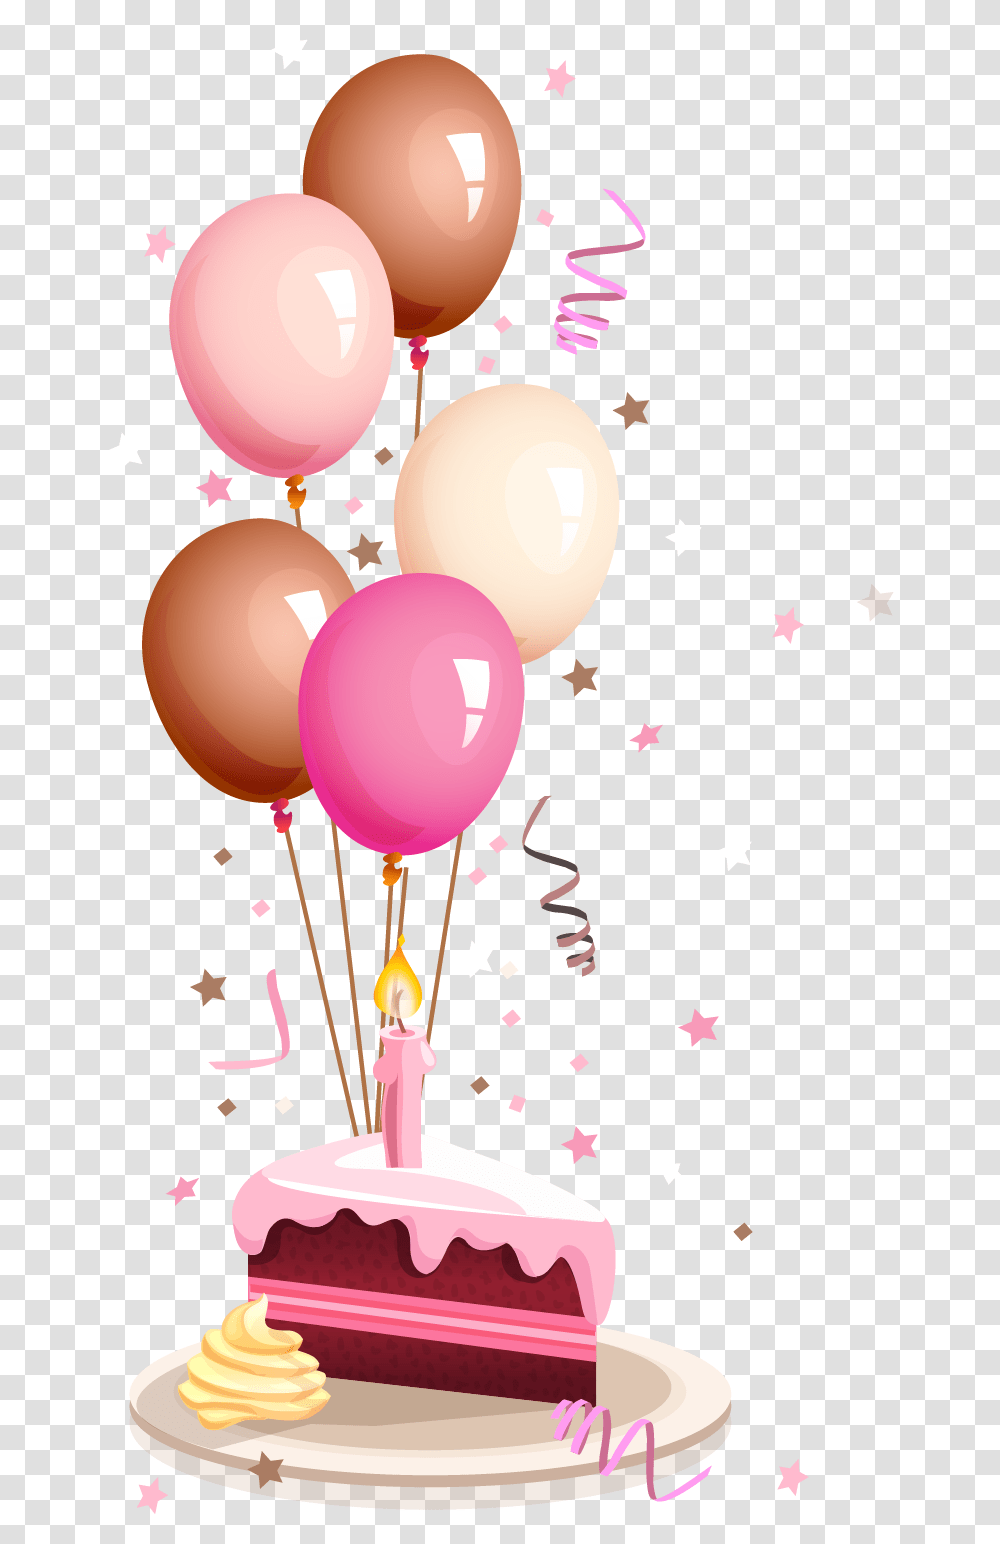 Download And Colorful Wish Greeting To Birthday Cake Clipart Happy Birthday To You, Balloon, Wedding Cake, Dessert, Food Transparent Png